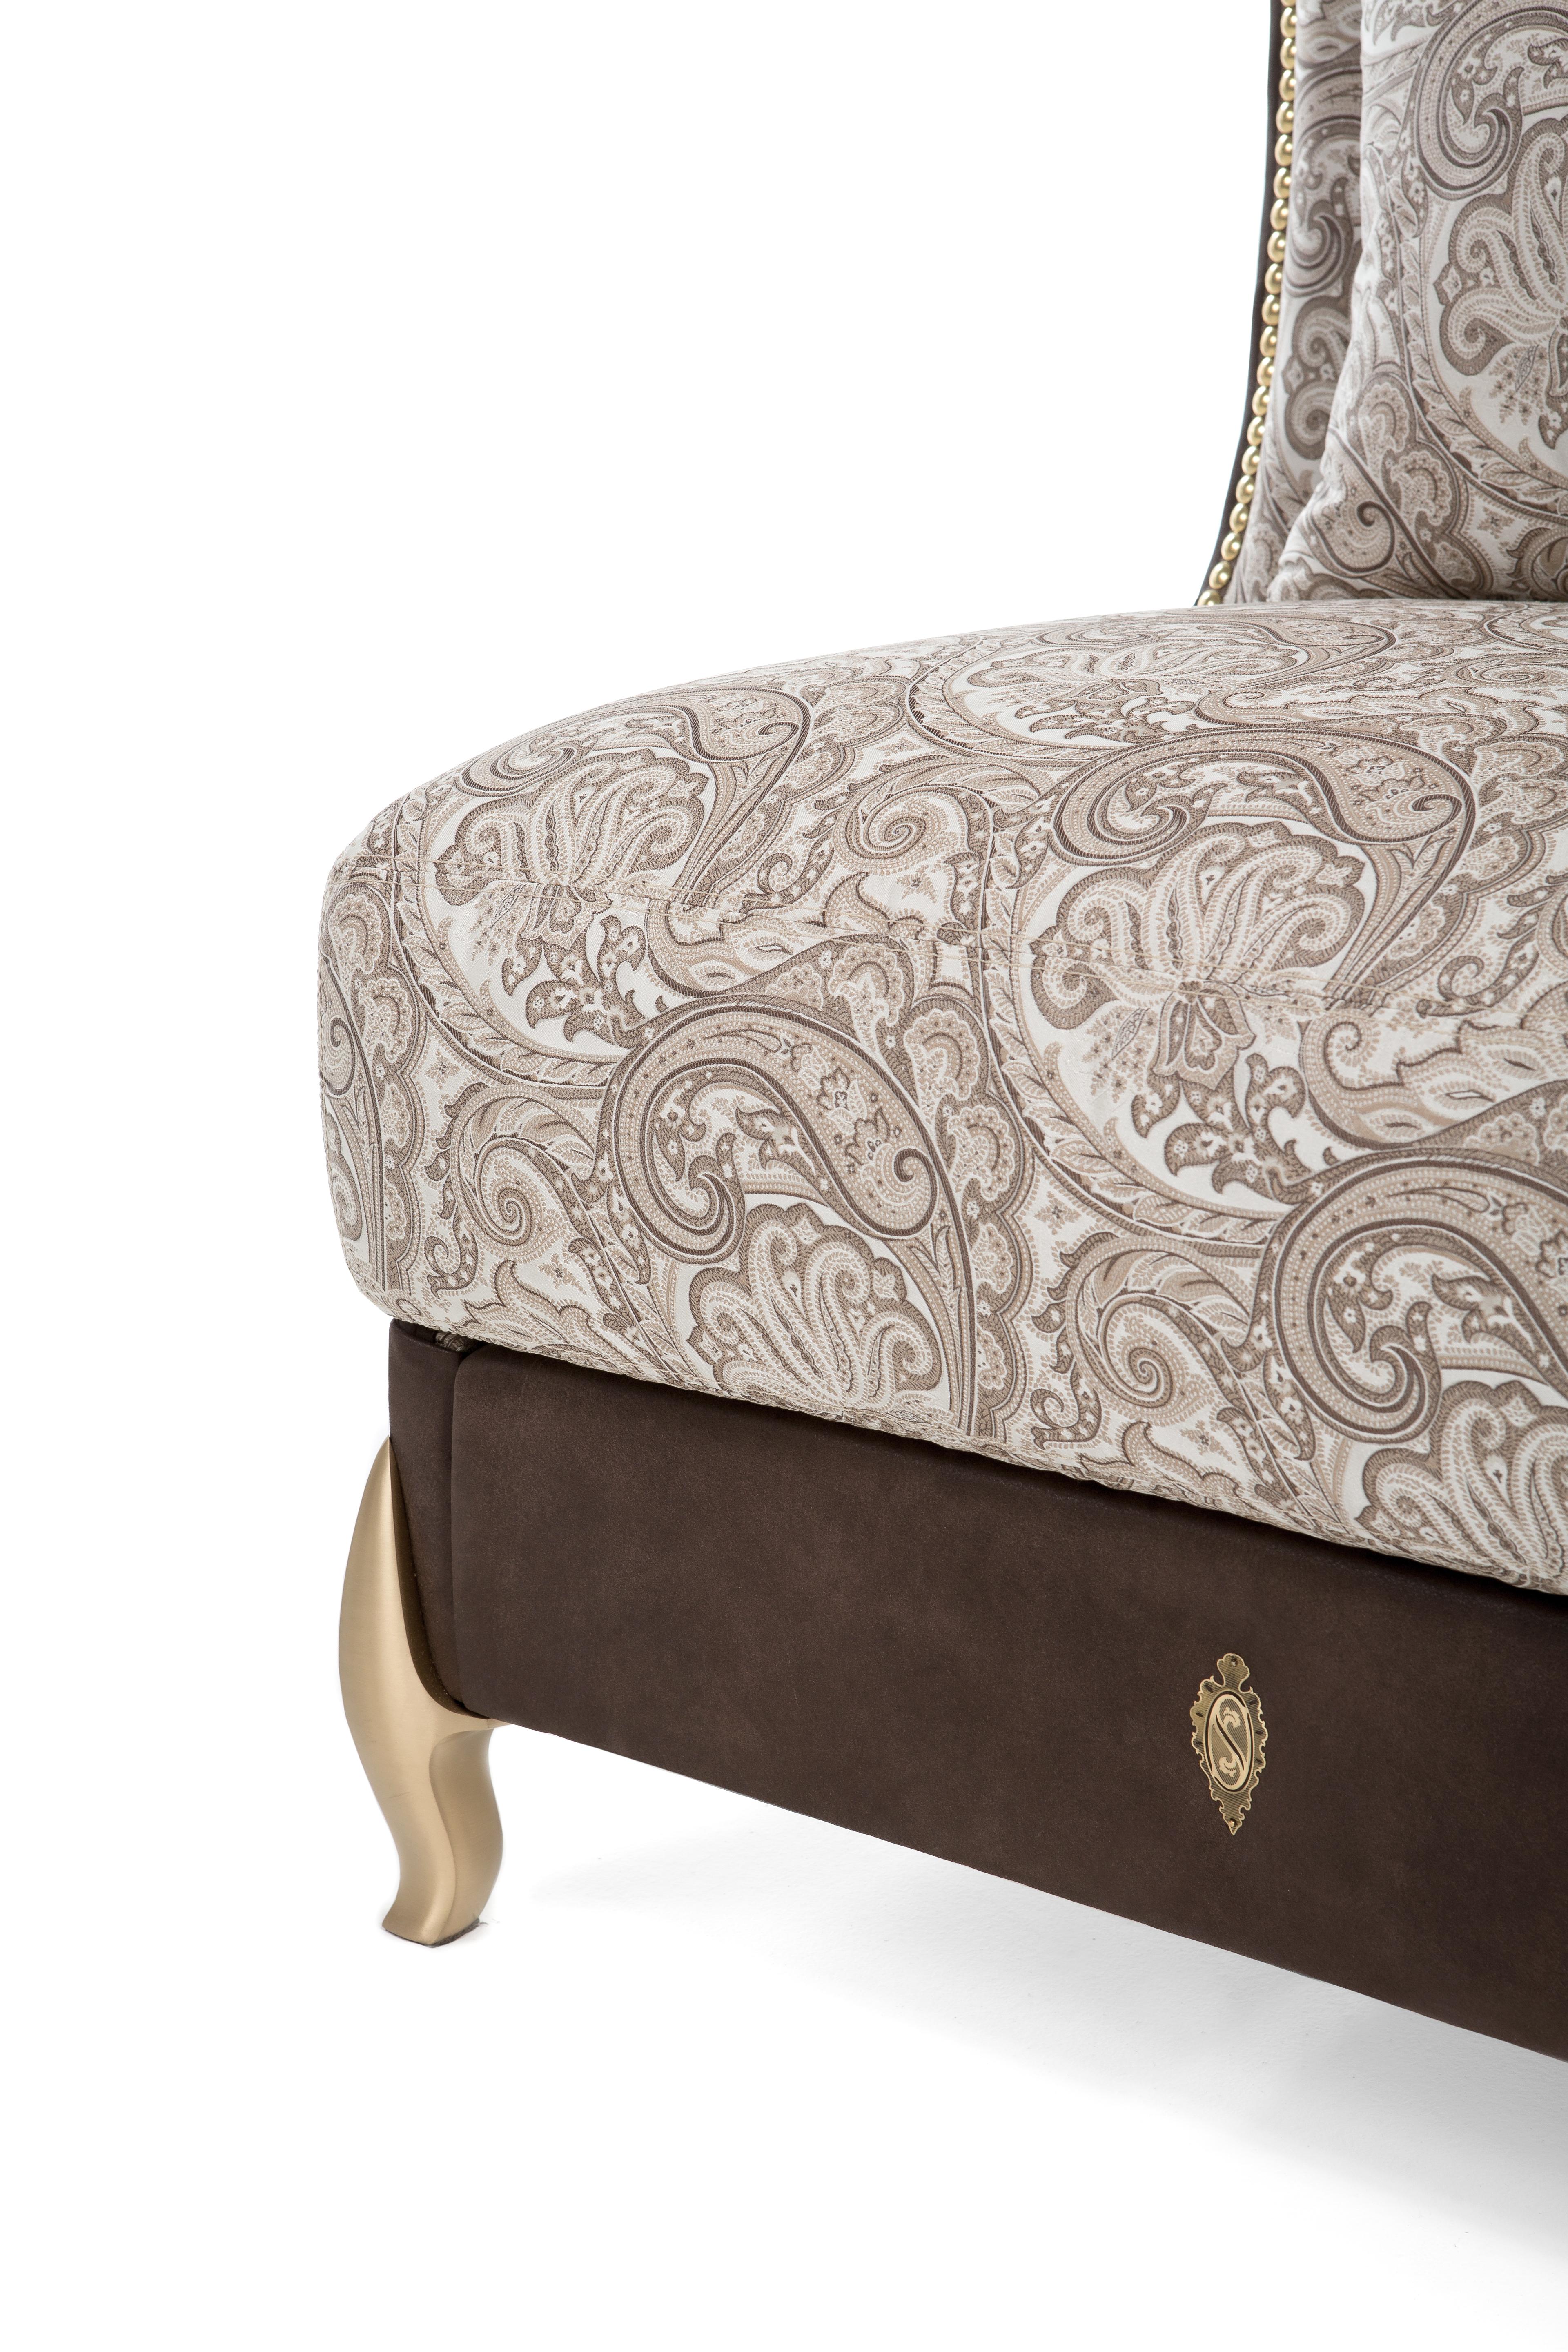 Italian Contemporary Bergere, Fully Upholstered with Brushed Brass Legs, Made in Italy For Sale